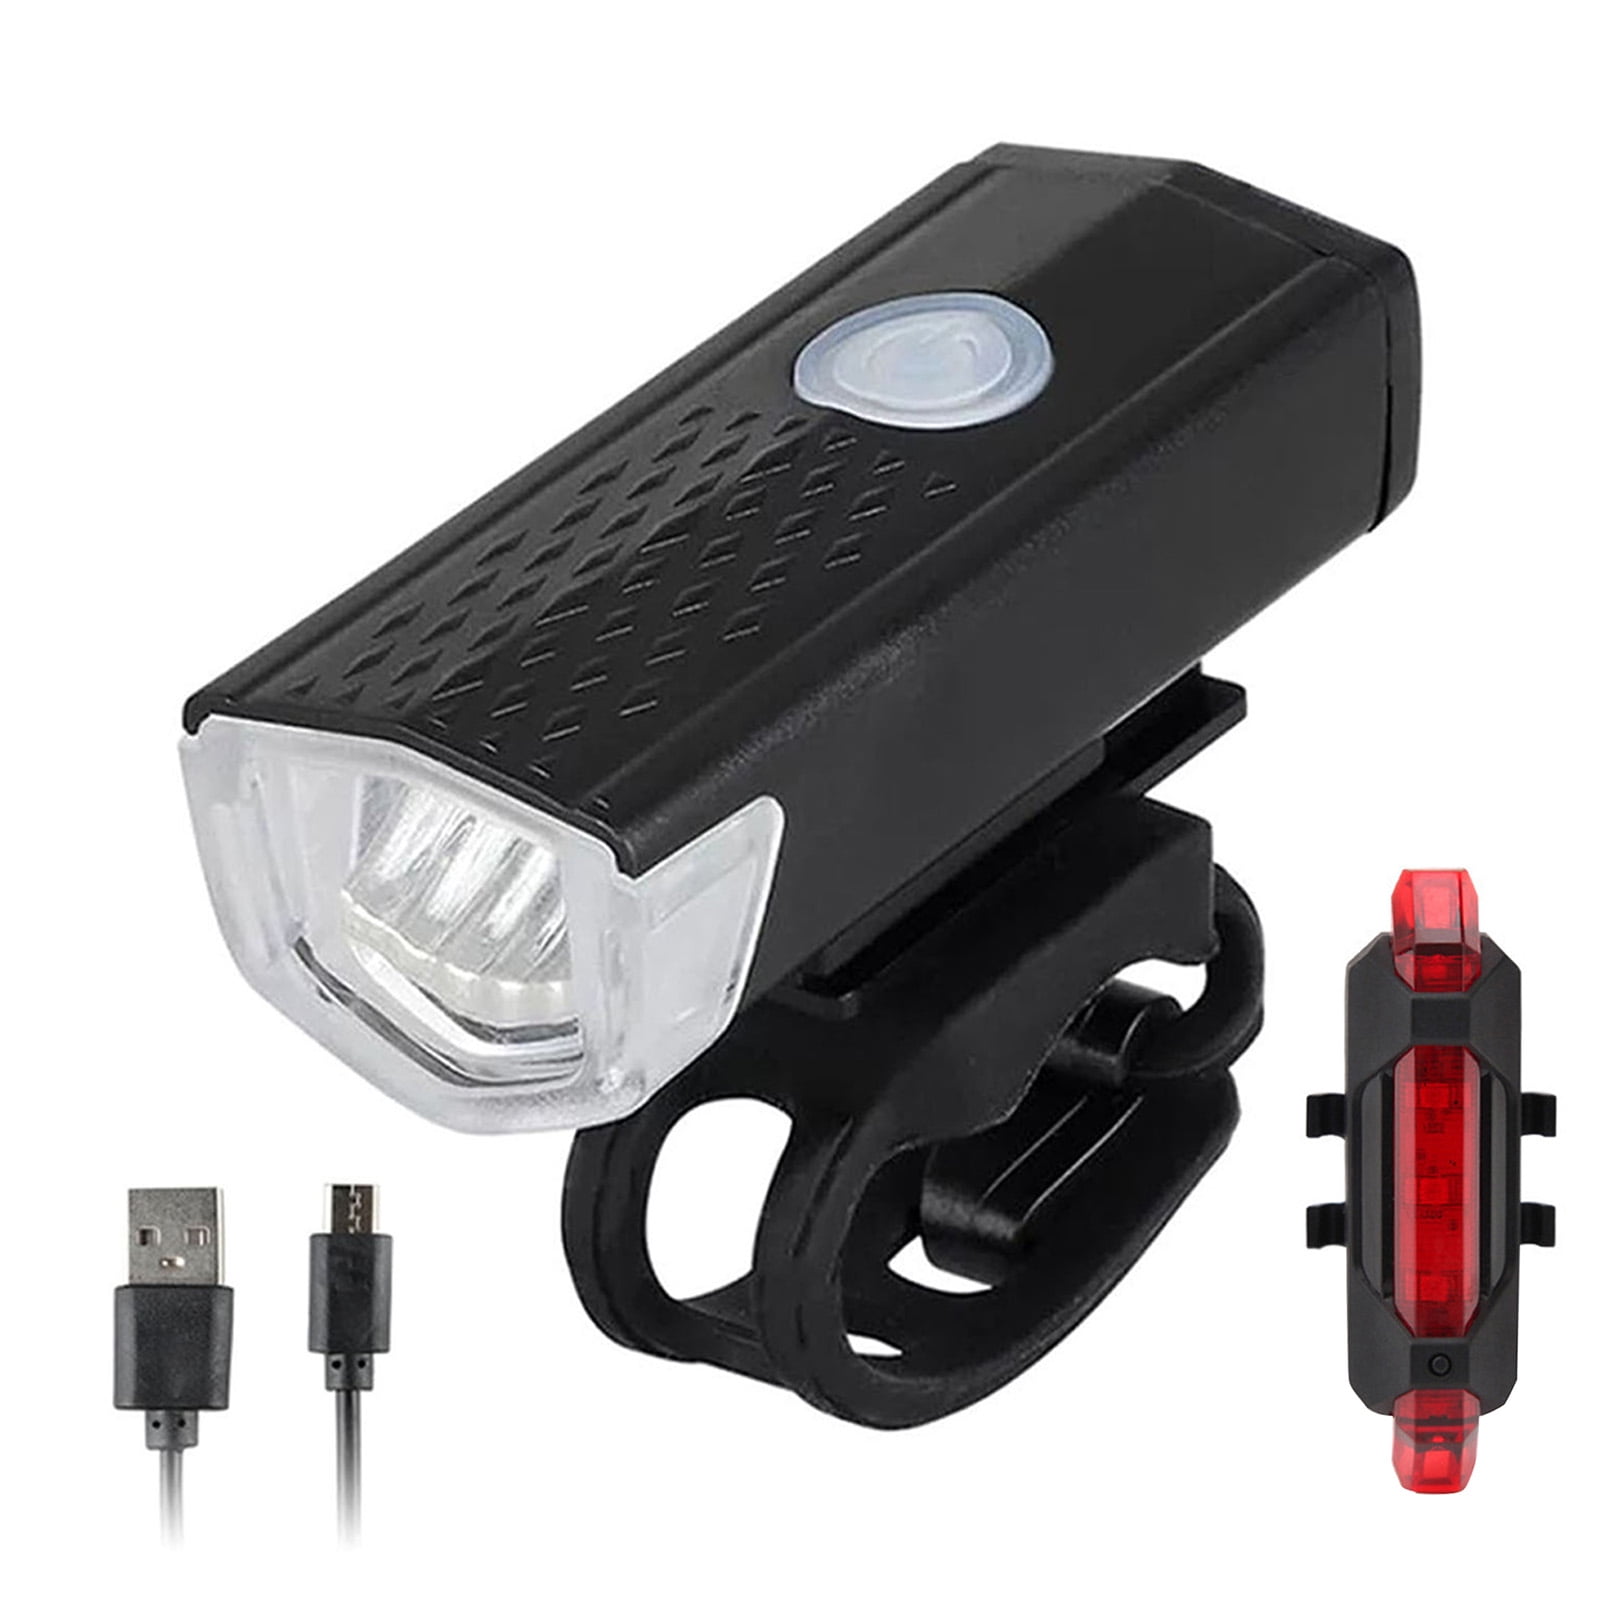 USB Rechargeable Bicycle Light Set with Front Bike Light Details about   Bike Light Set 